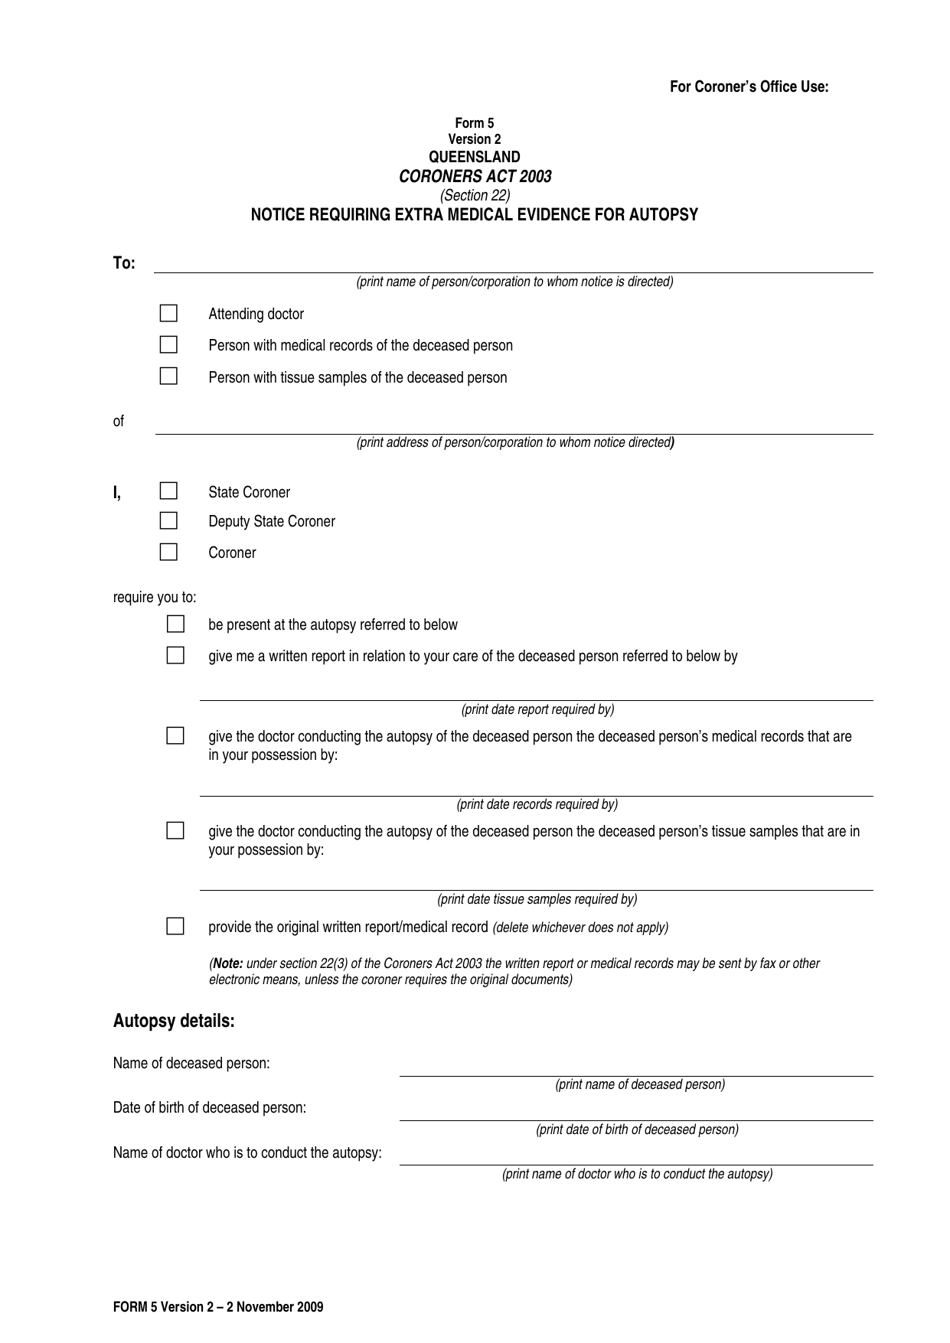 Form 5 Notice Requiring Extra Medical Evidence for Autopsy - Queensland, Australia, Page 1